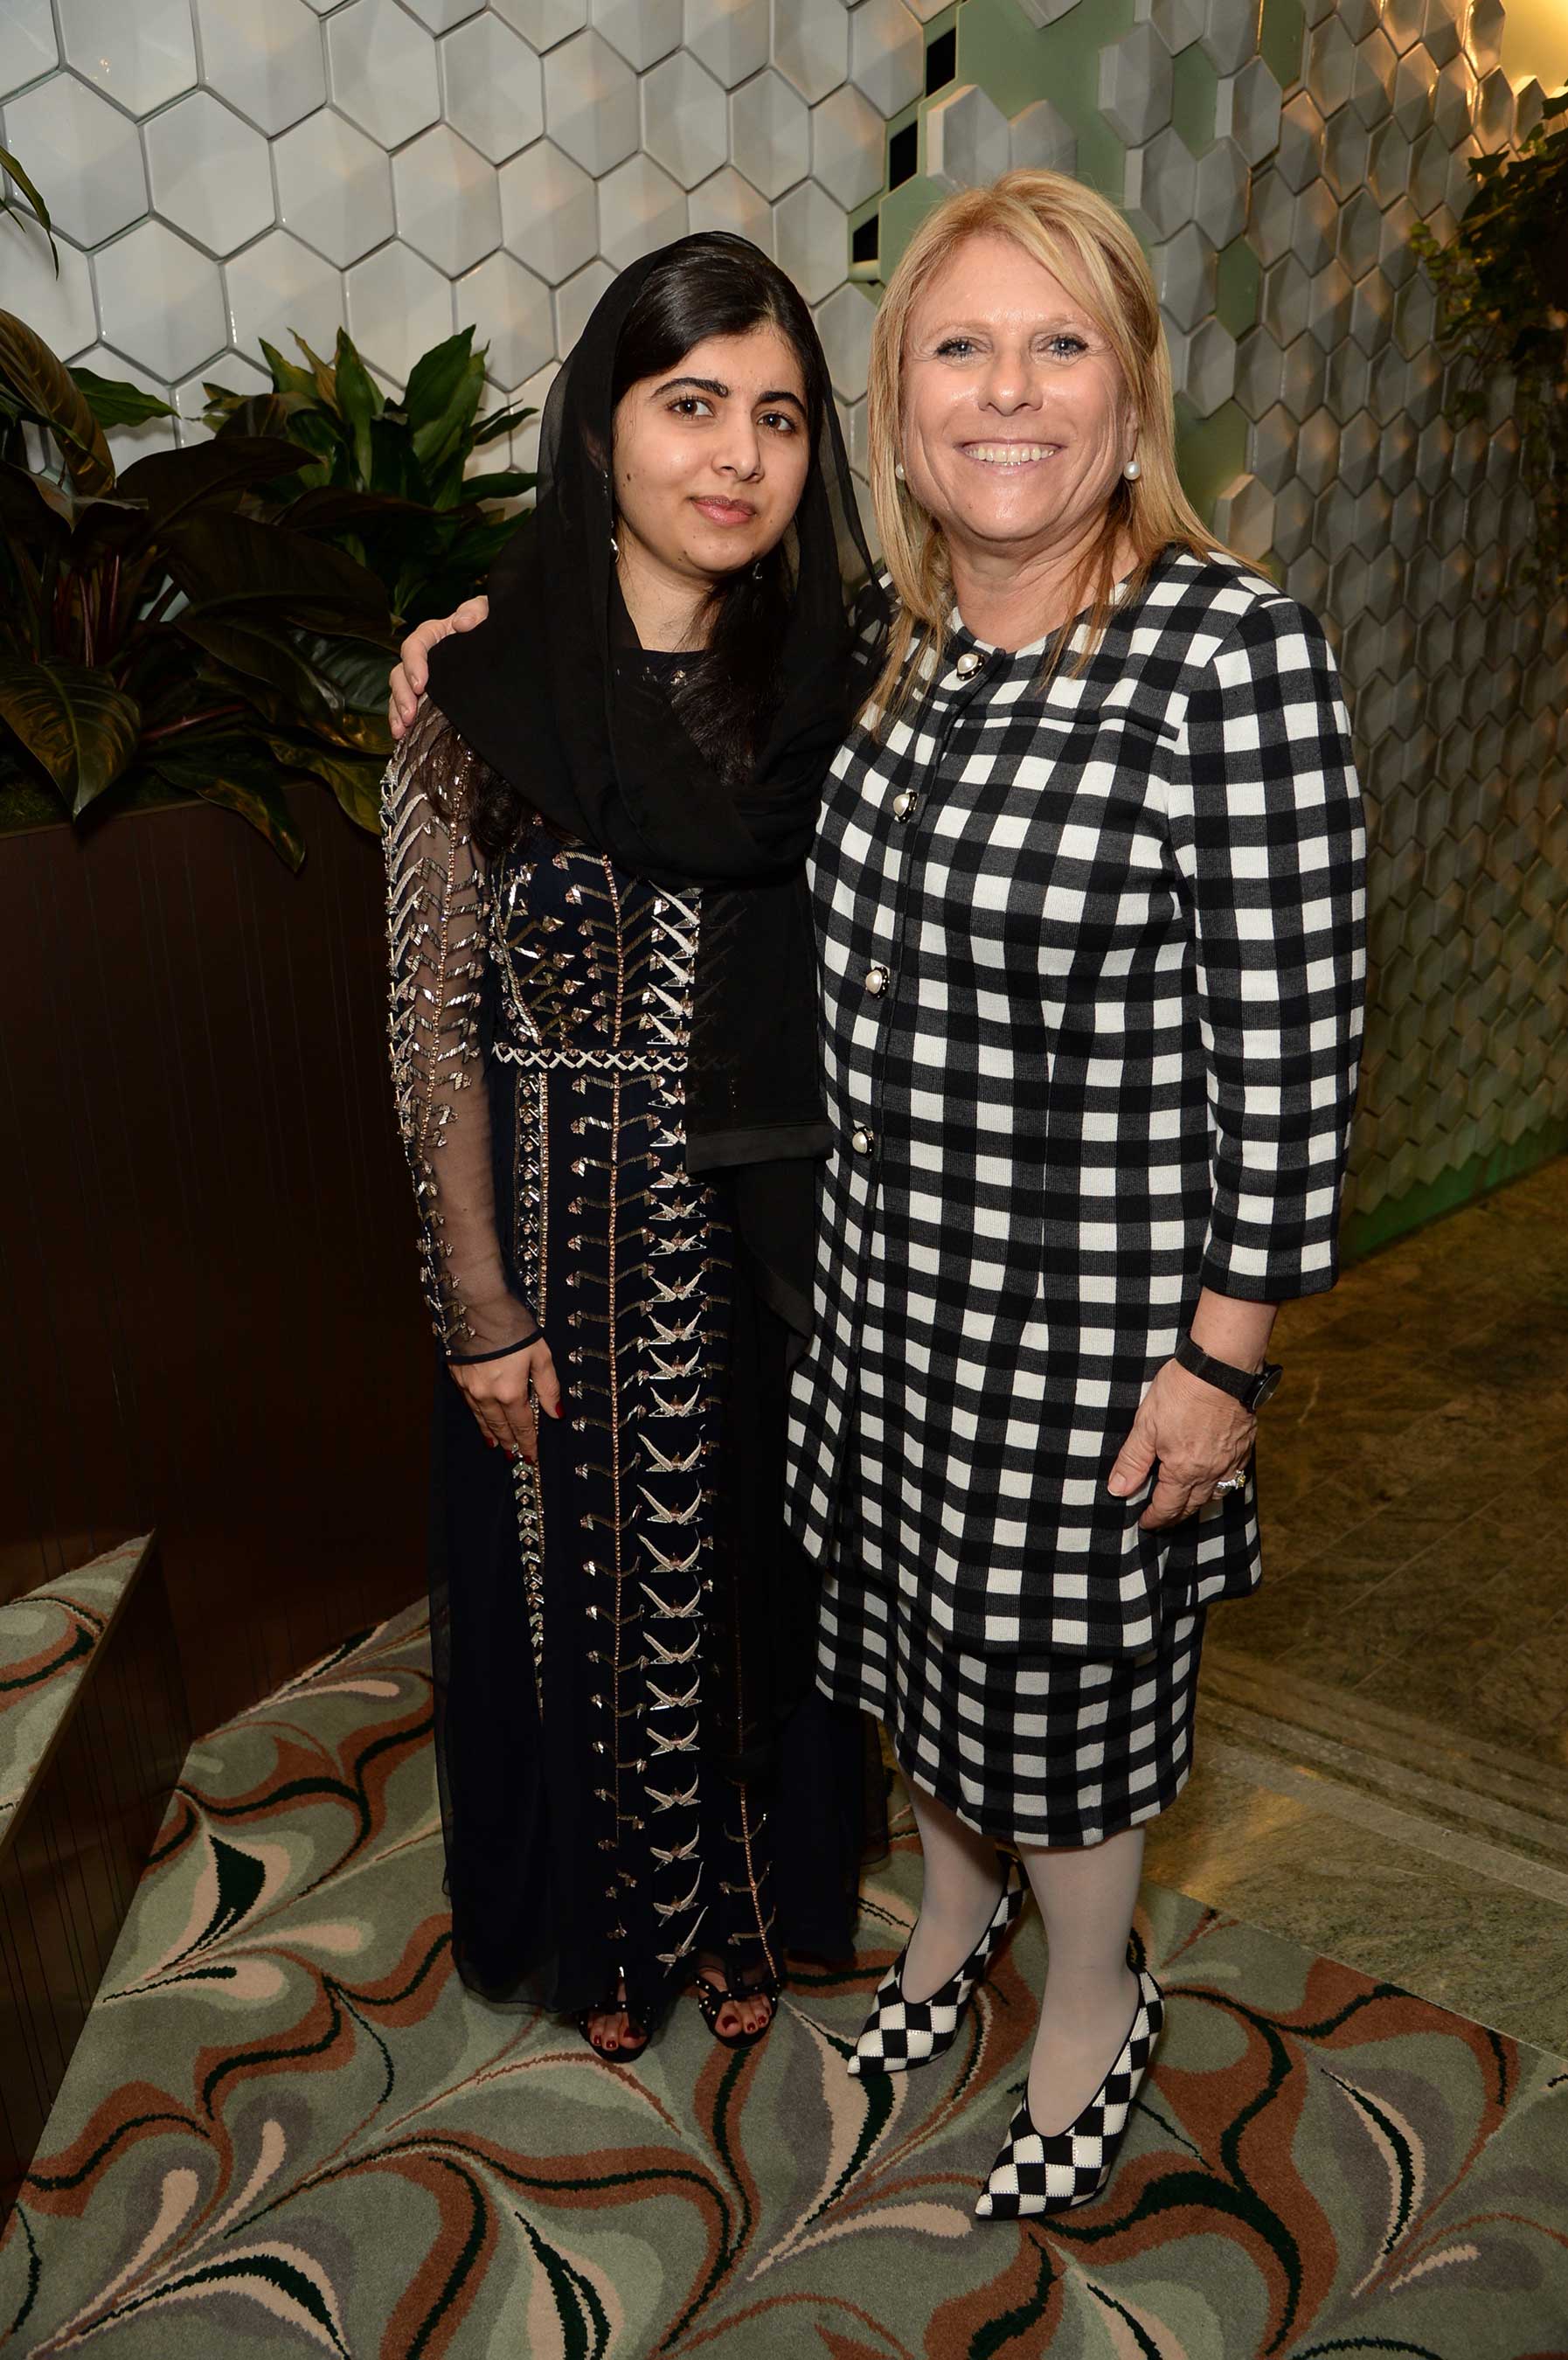 Malala Yousafzai with Celebrity Cruises President and CEO Lisa Lutoff-Perlo on the all-new Celebrity Edge.